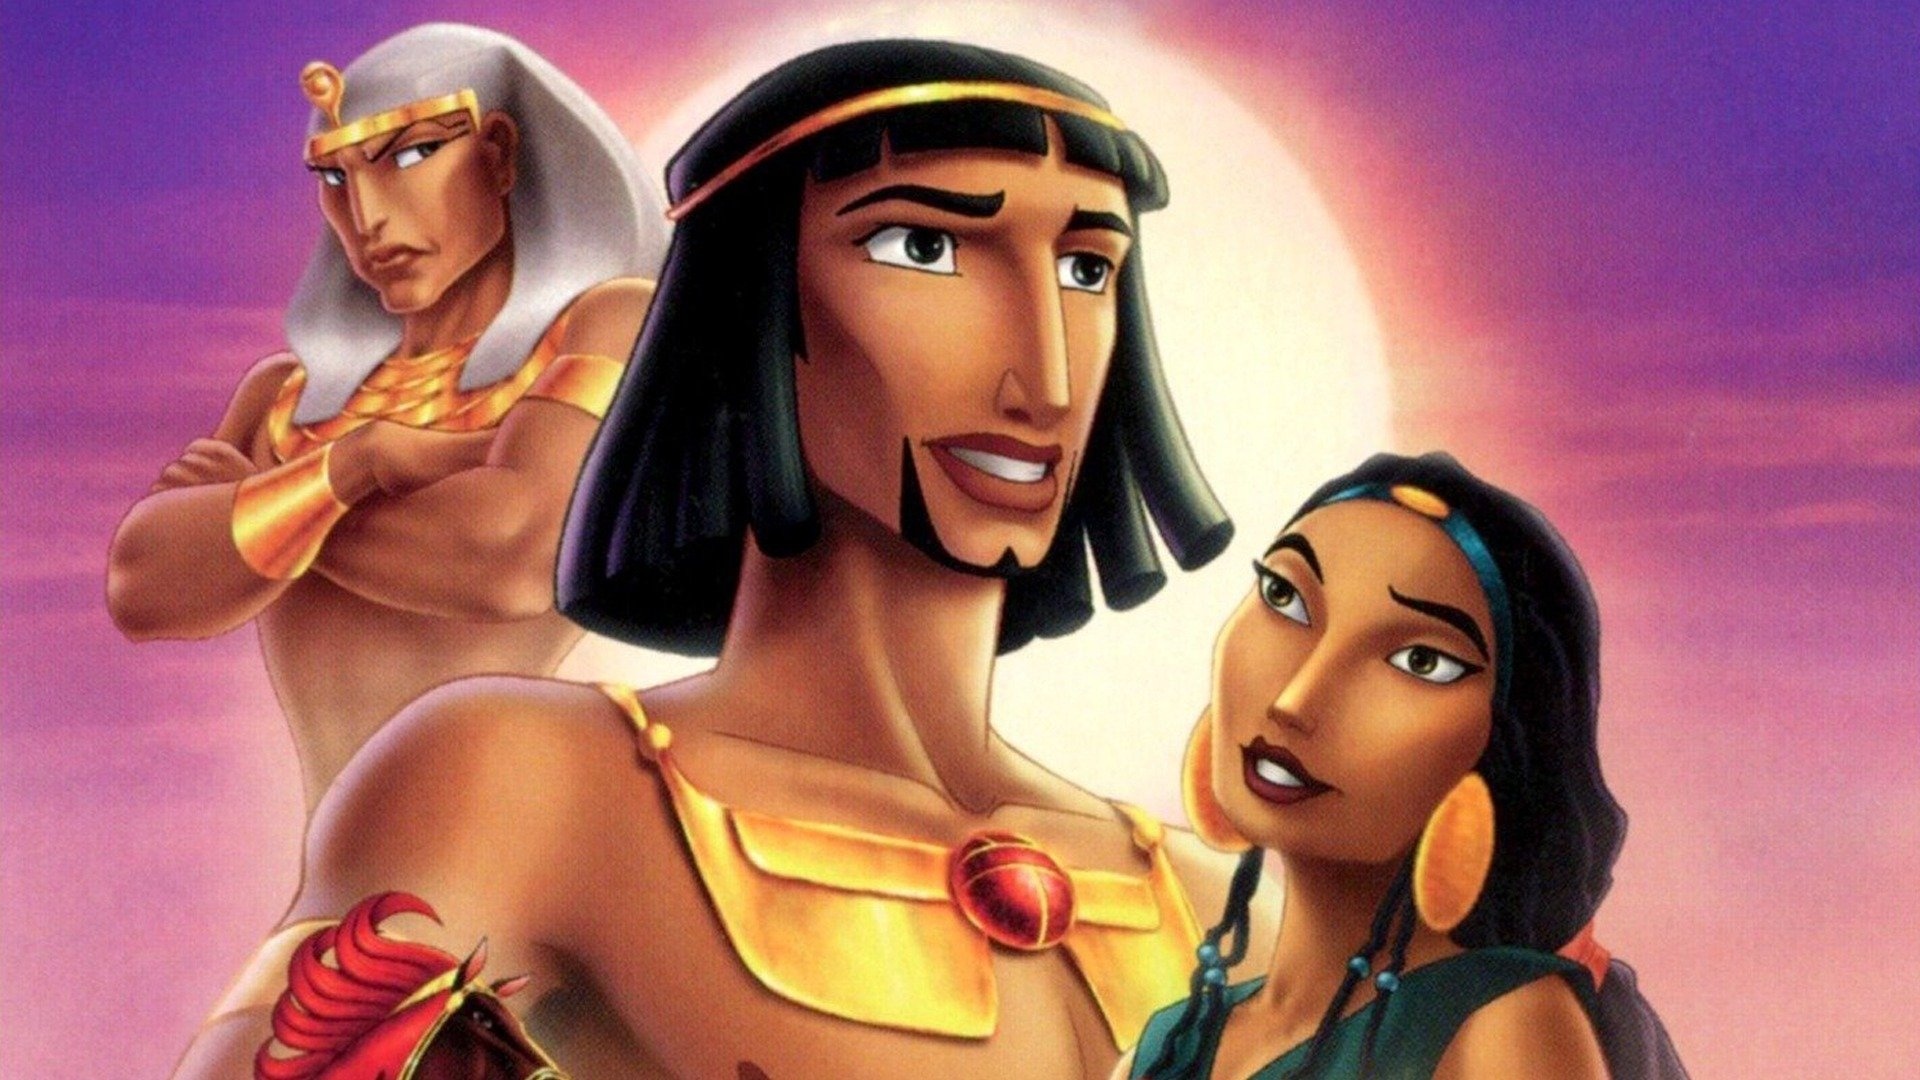 The Prince of Egypt, Watch full movie, Online streaming, Cinematic delight, 1920x1080 Full HD Desktop